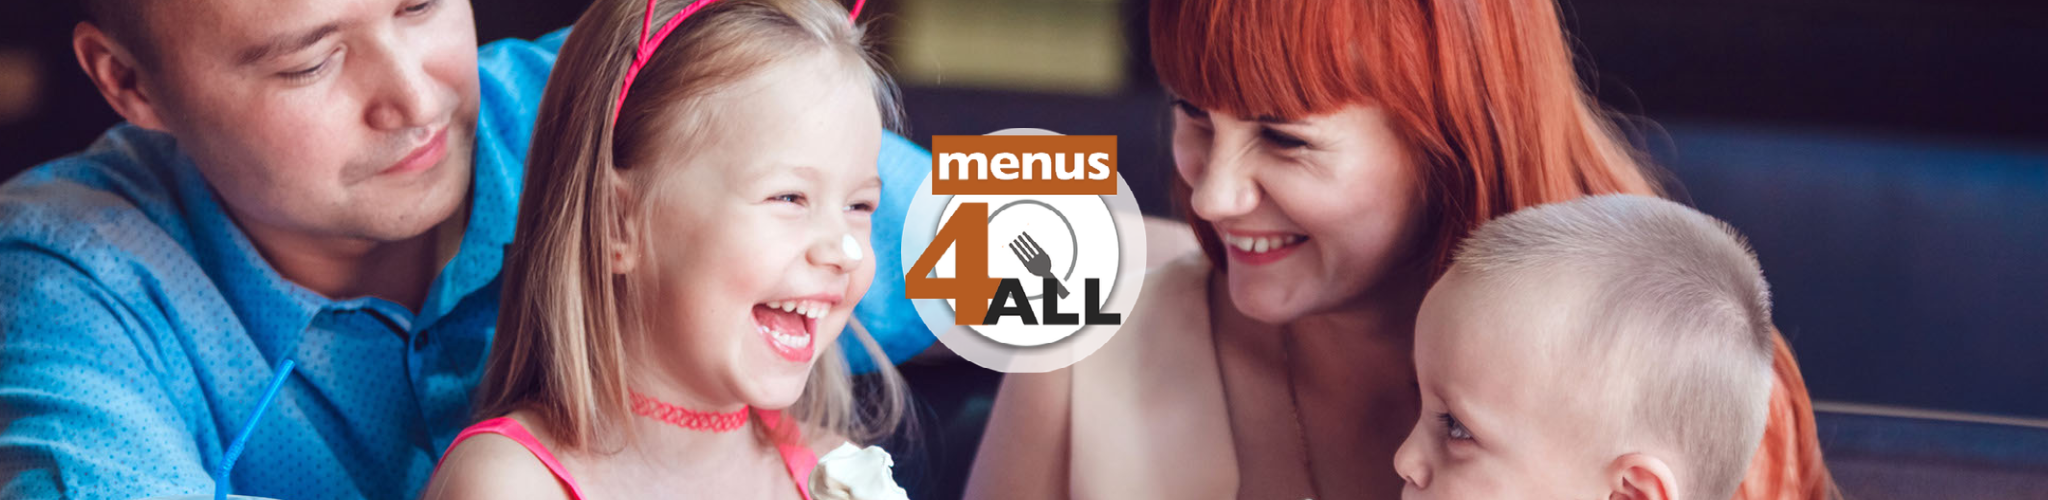 Family of 4 eating ice cream out. Menus 4 ALL logo